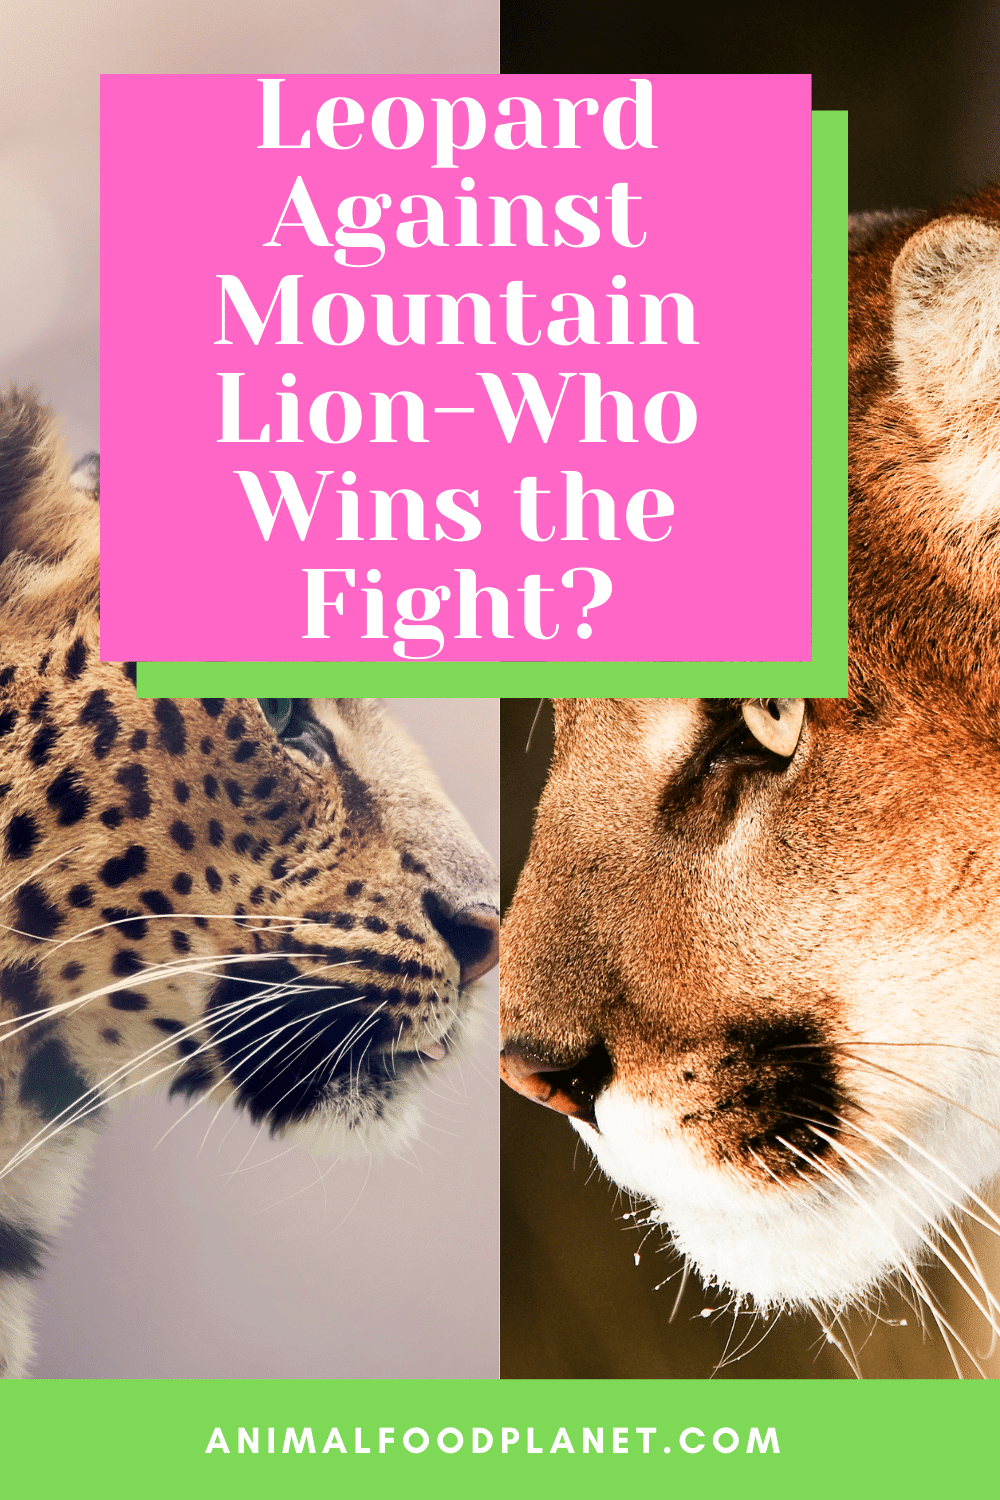 Leopard Against Mountain Lion-Who Wins the Fight